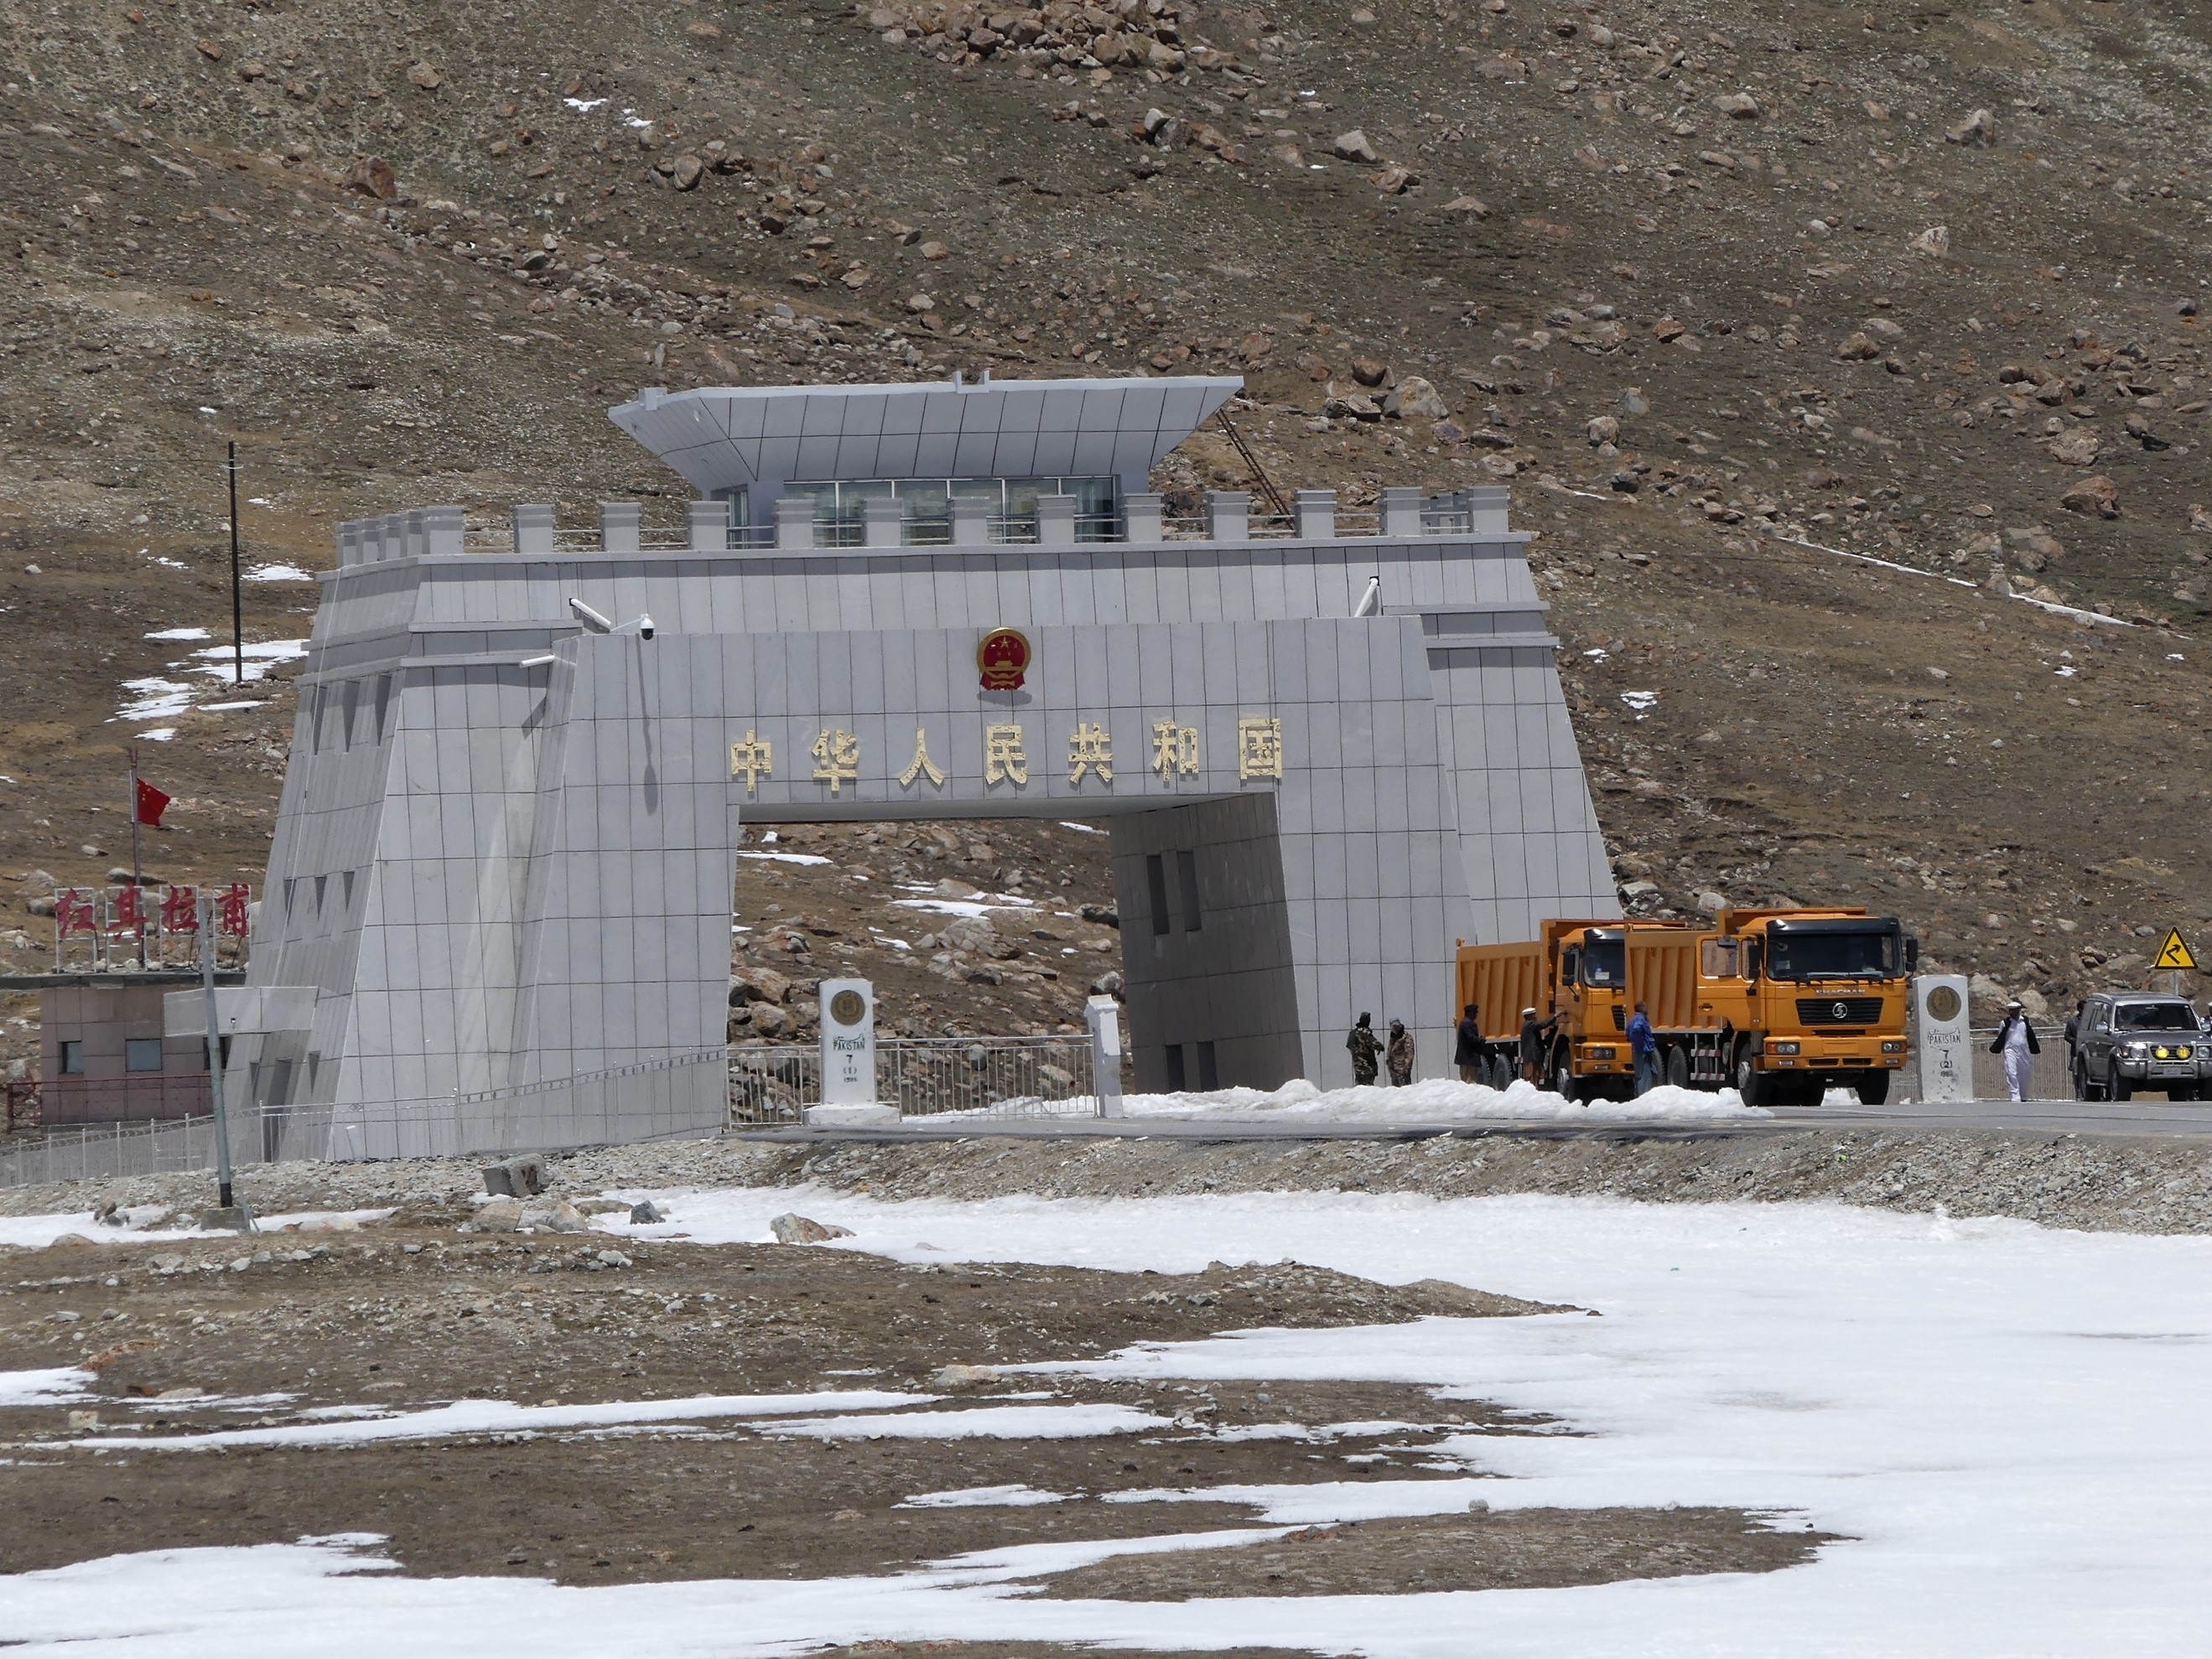 Khunjerab Pass, Hunza from Pakistan side, border between China and Pakistan, Highest border crossing in the world